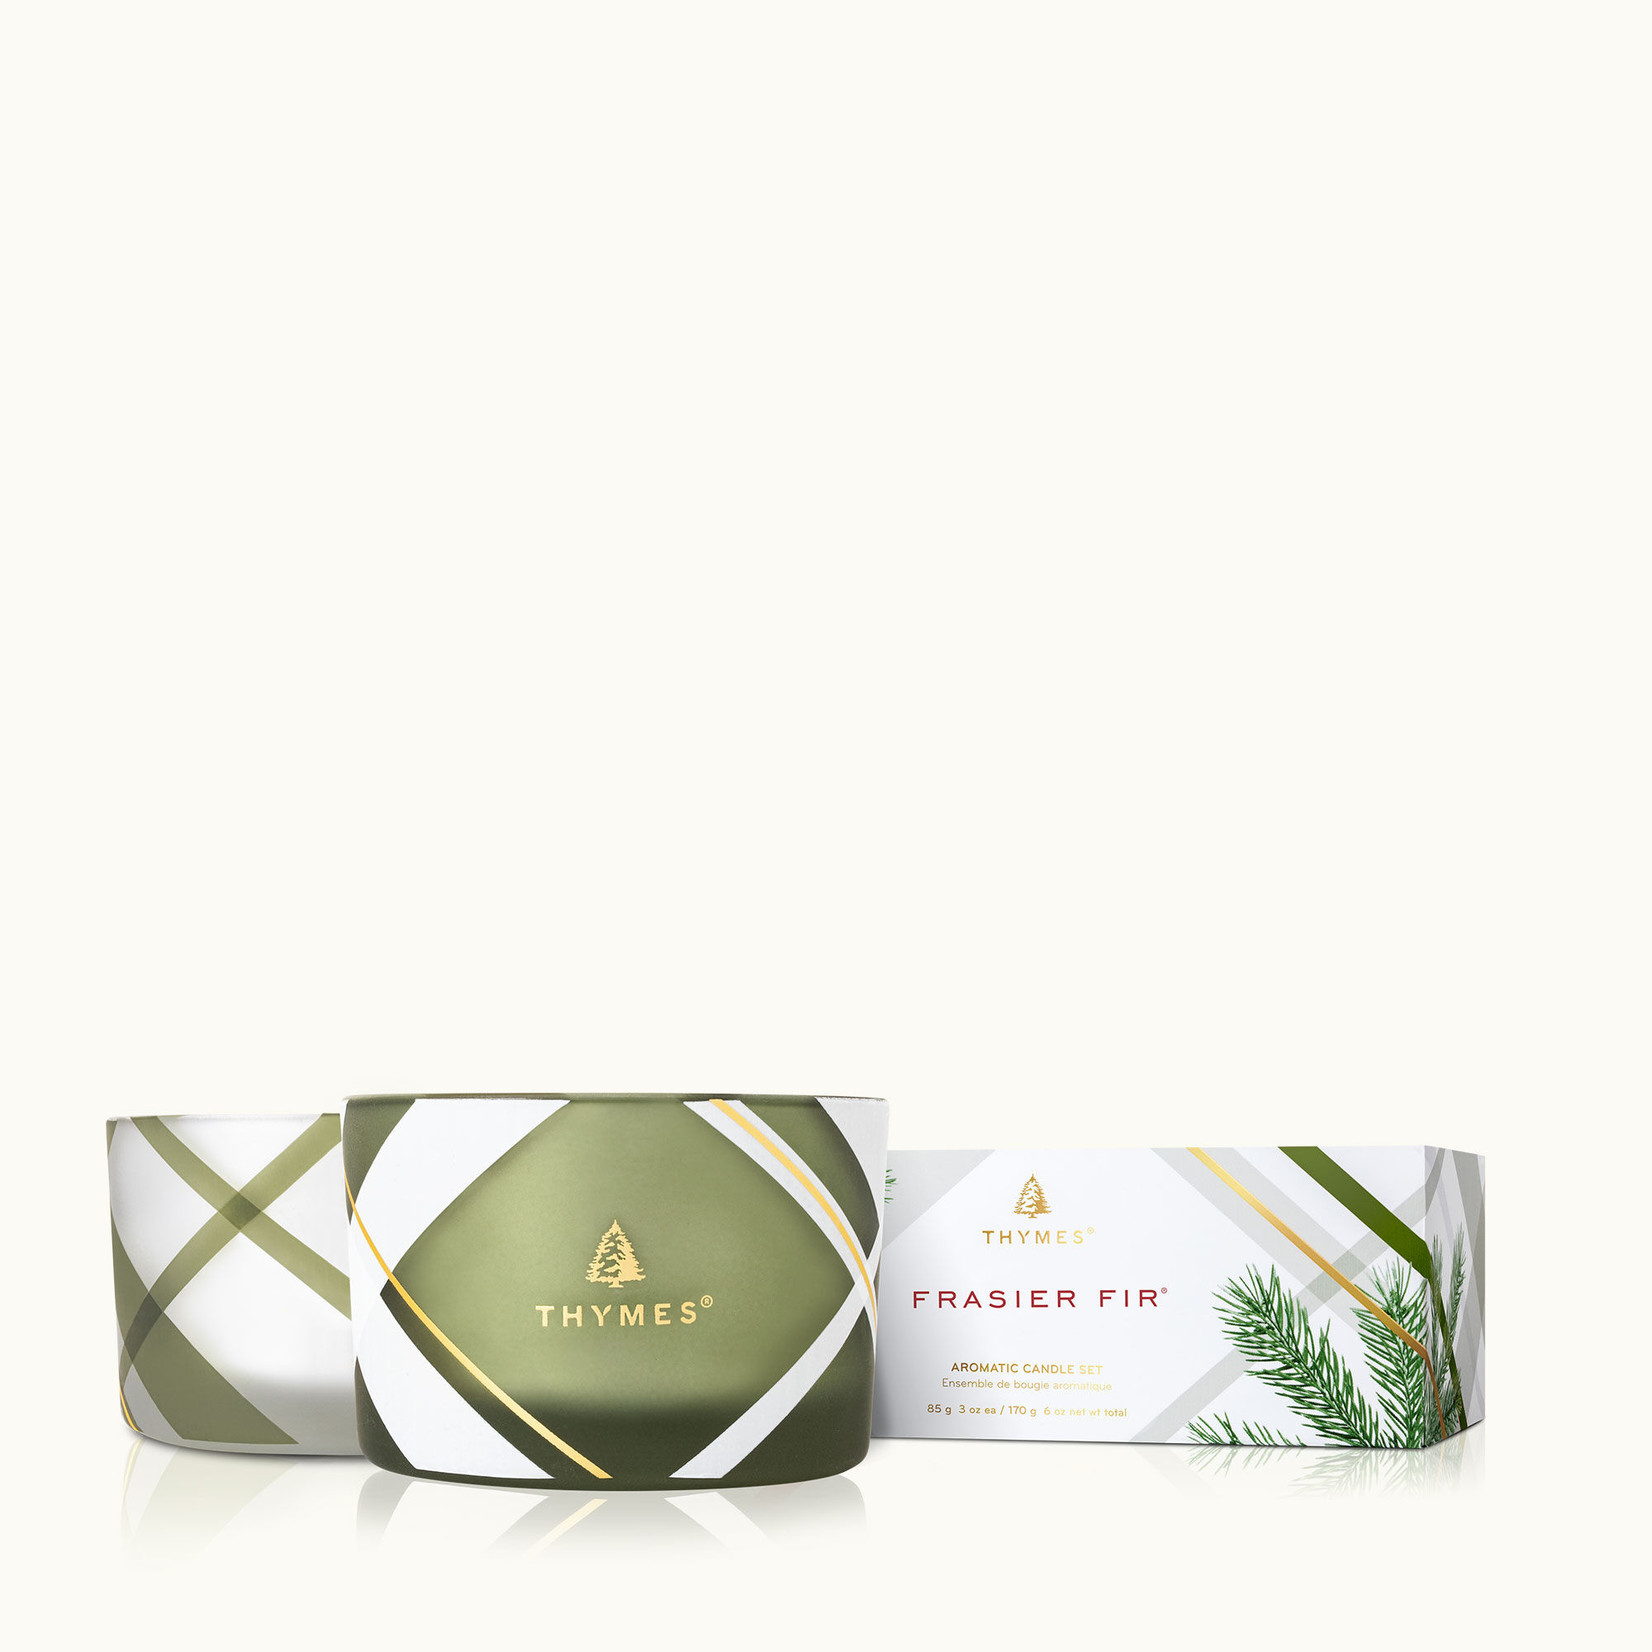 Thymes Thymes - Frosted Plaid Frasier Fir Candle Set